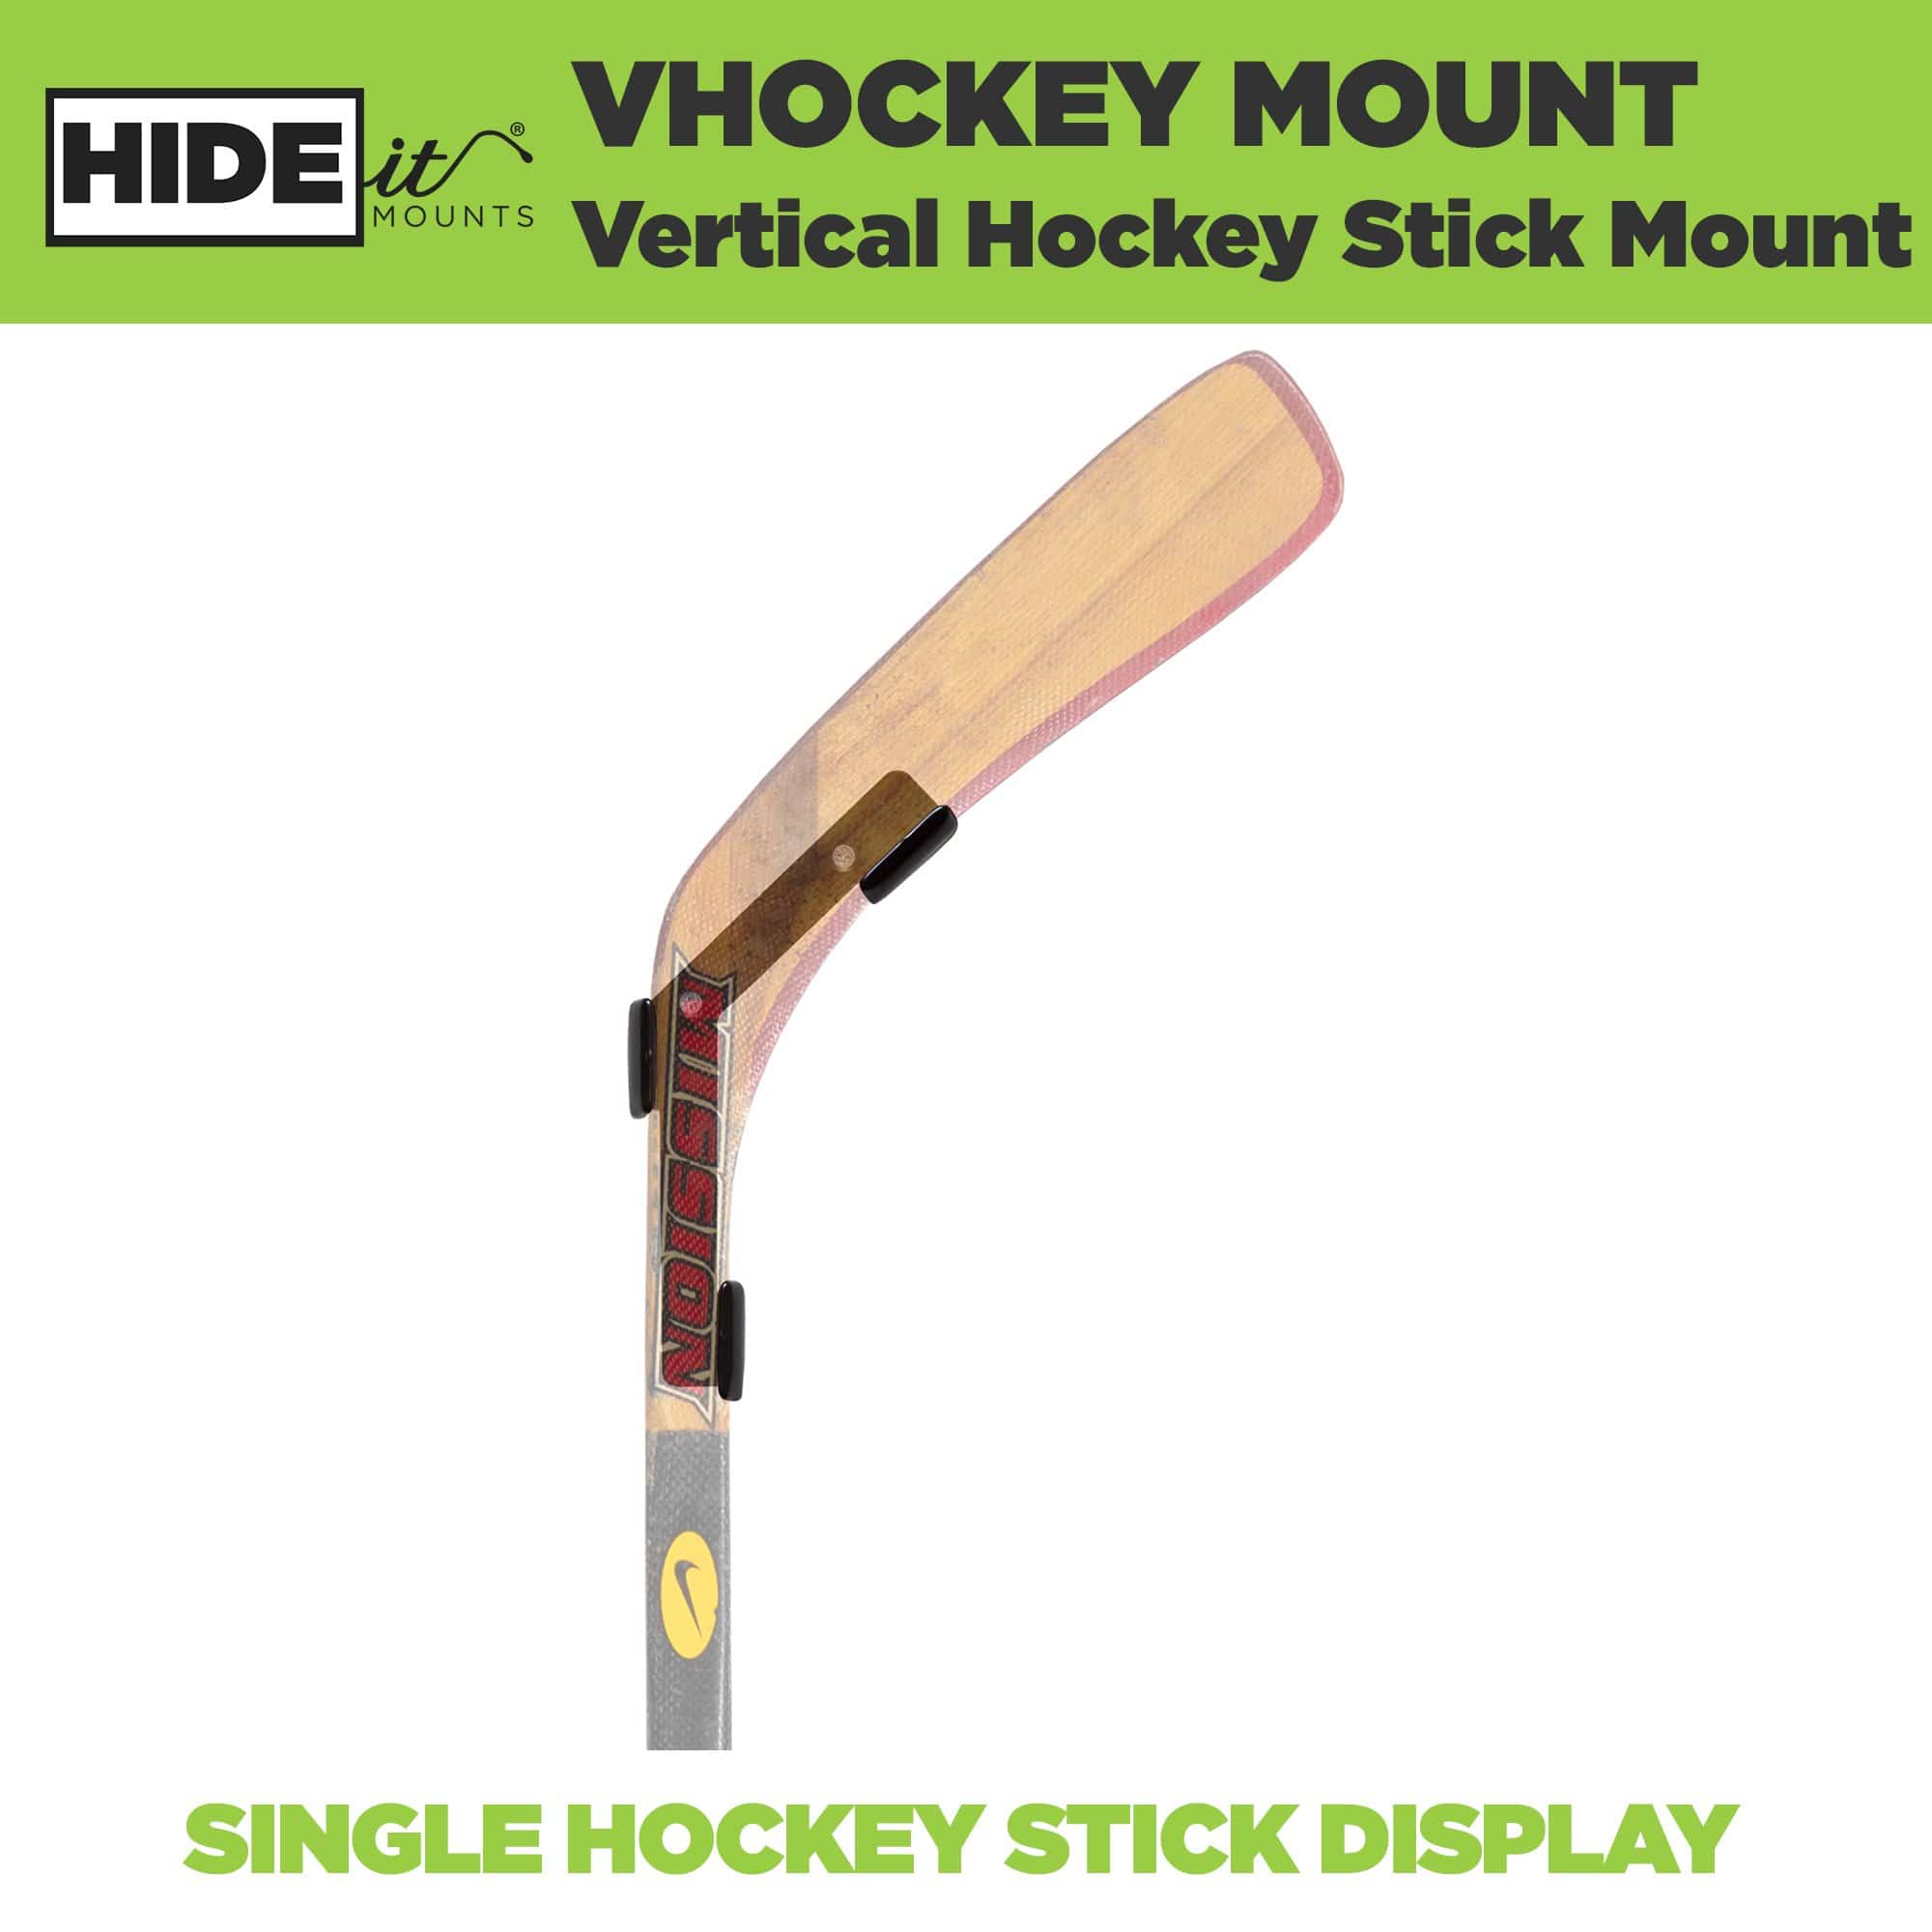 Greyed out hockey stick in the HIDEit VHockey Mount - Vertical display for hockey sticks.